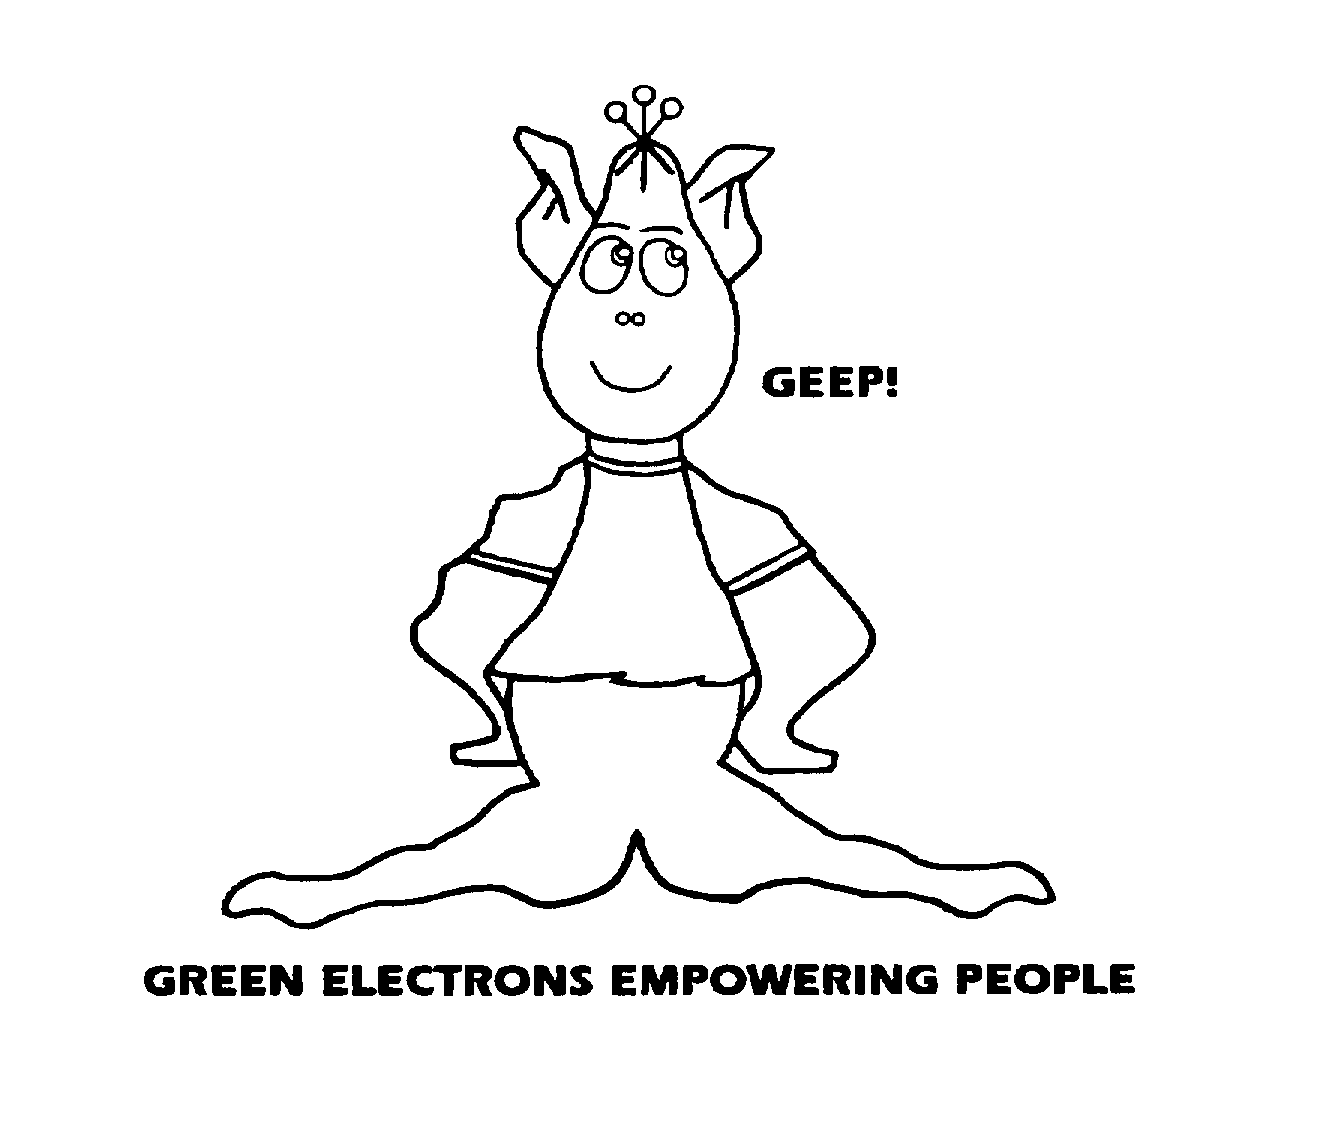  GEEP! GREEN ELECTRONS EMPOWERING PEOPLE